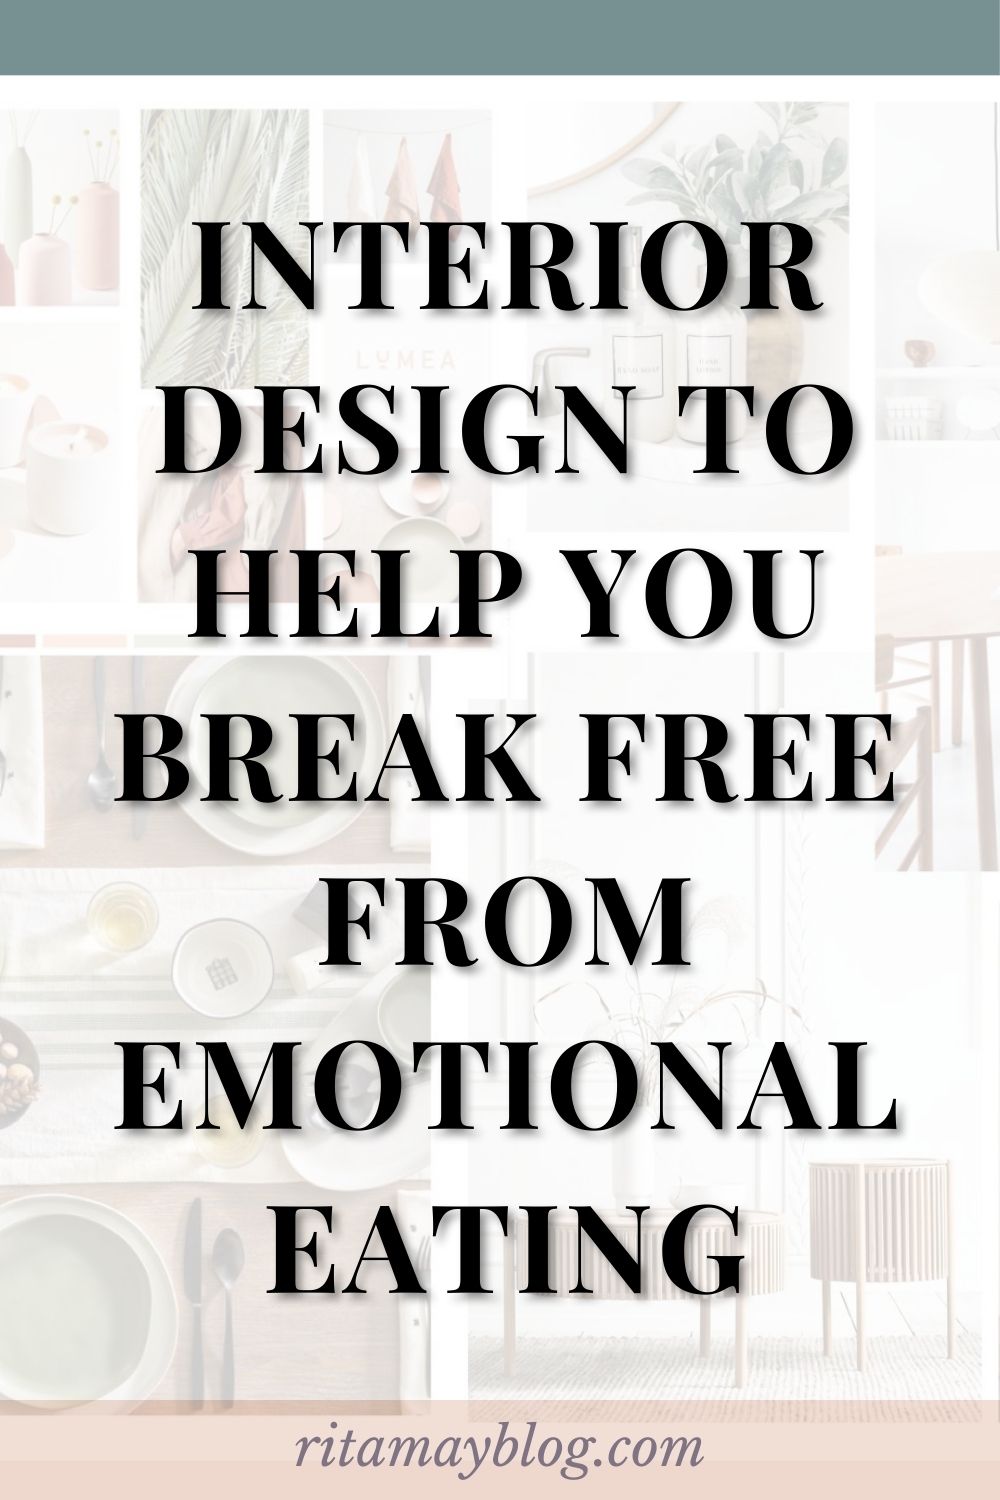 Interior design to help you break free from emotional eating